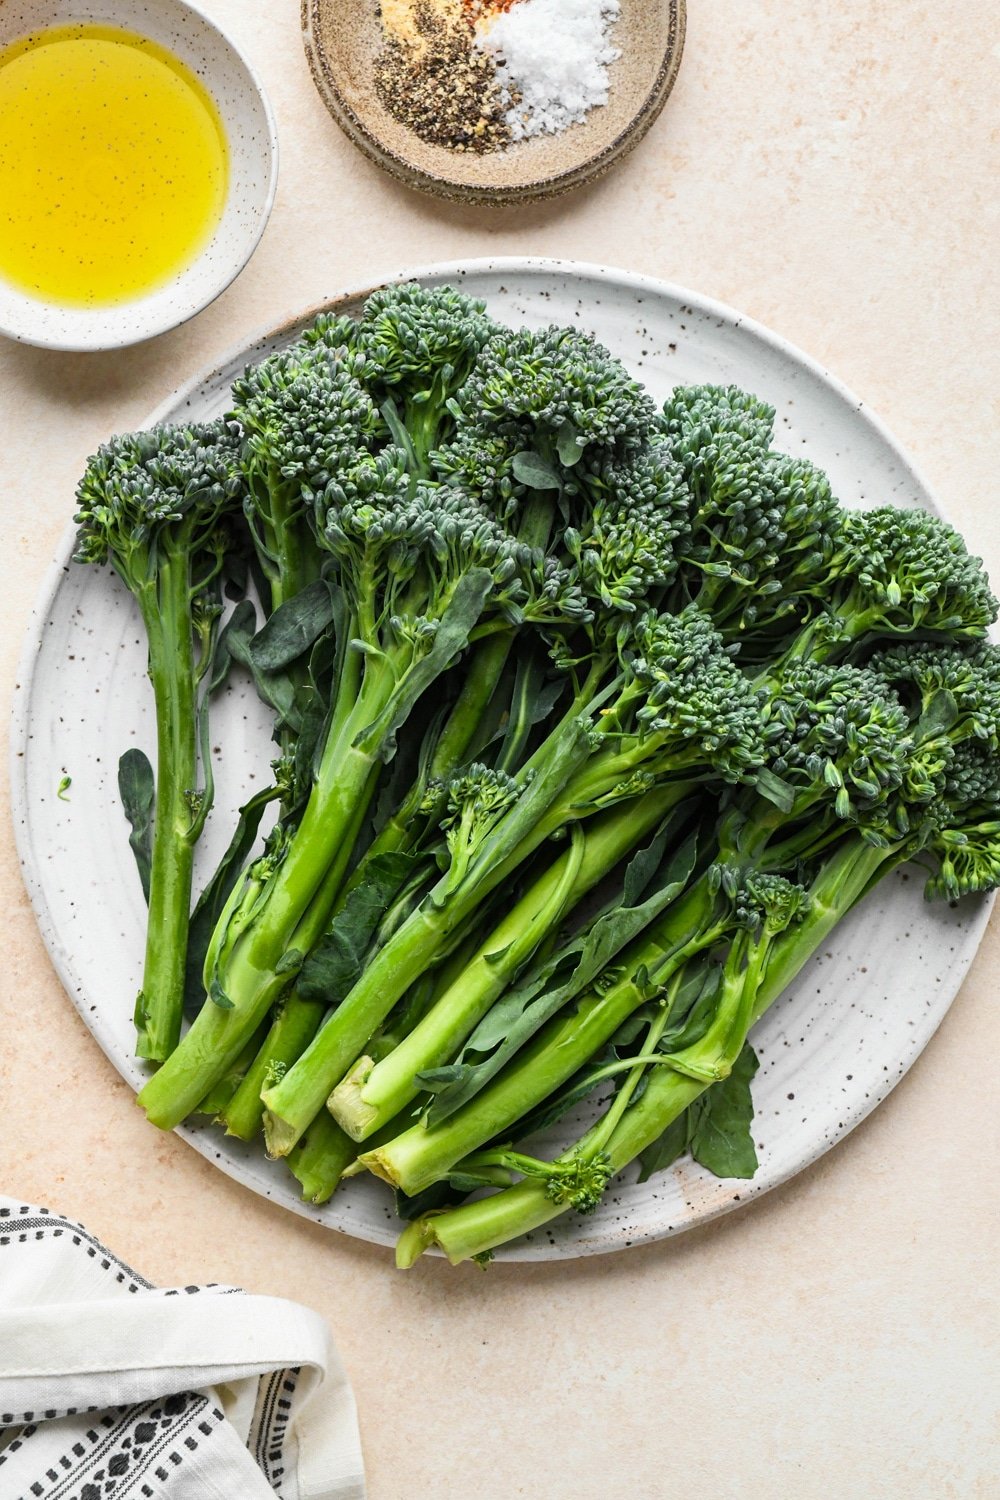 Ingredients for roasted broccolini in various ceramics on a cream colored background.